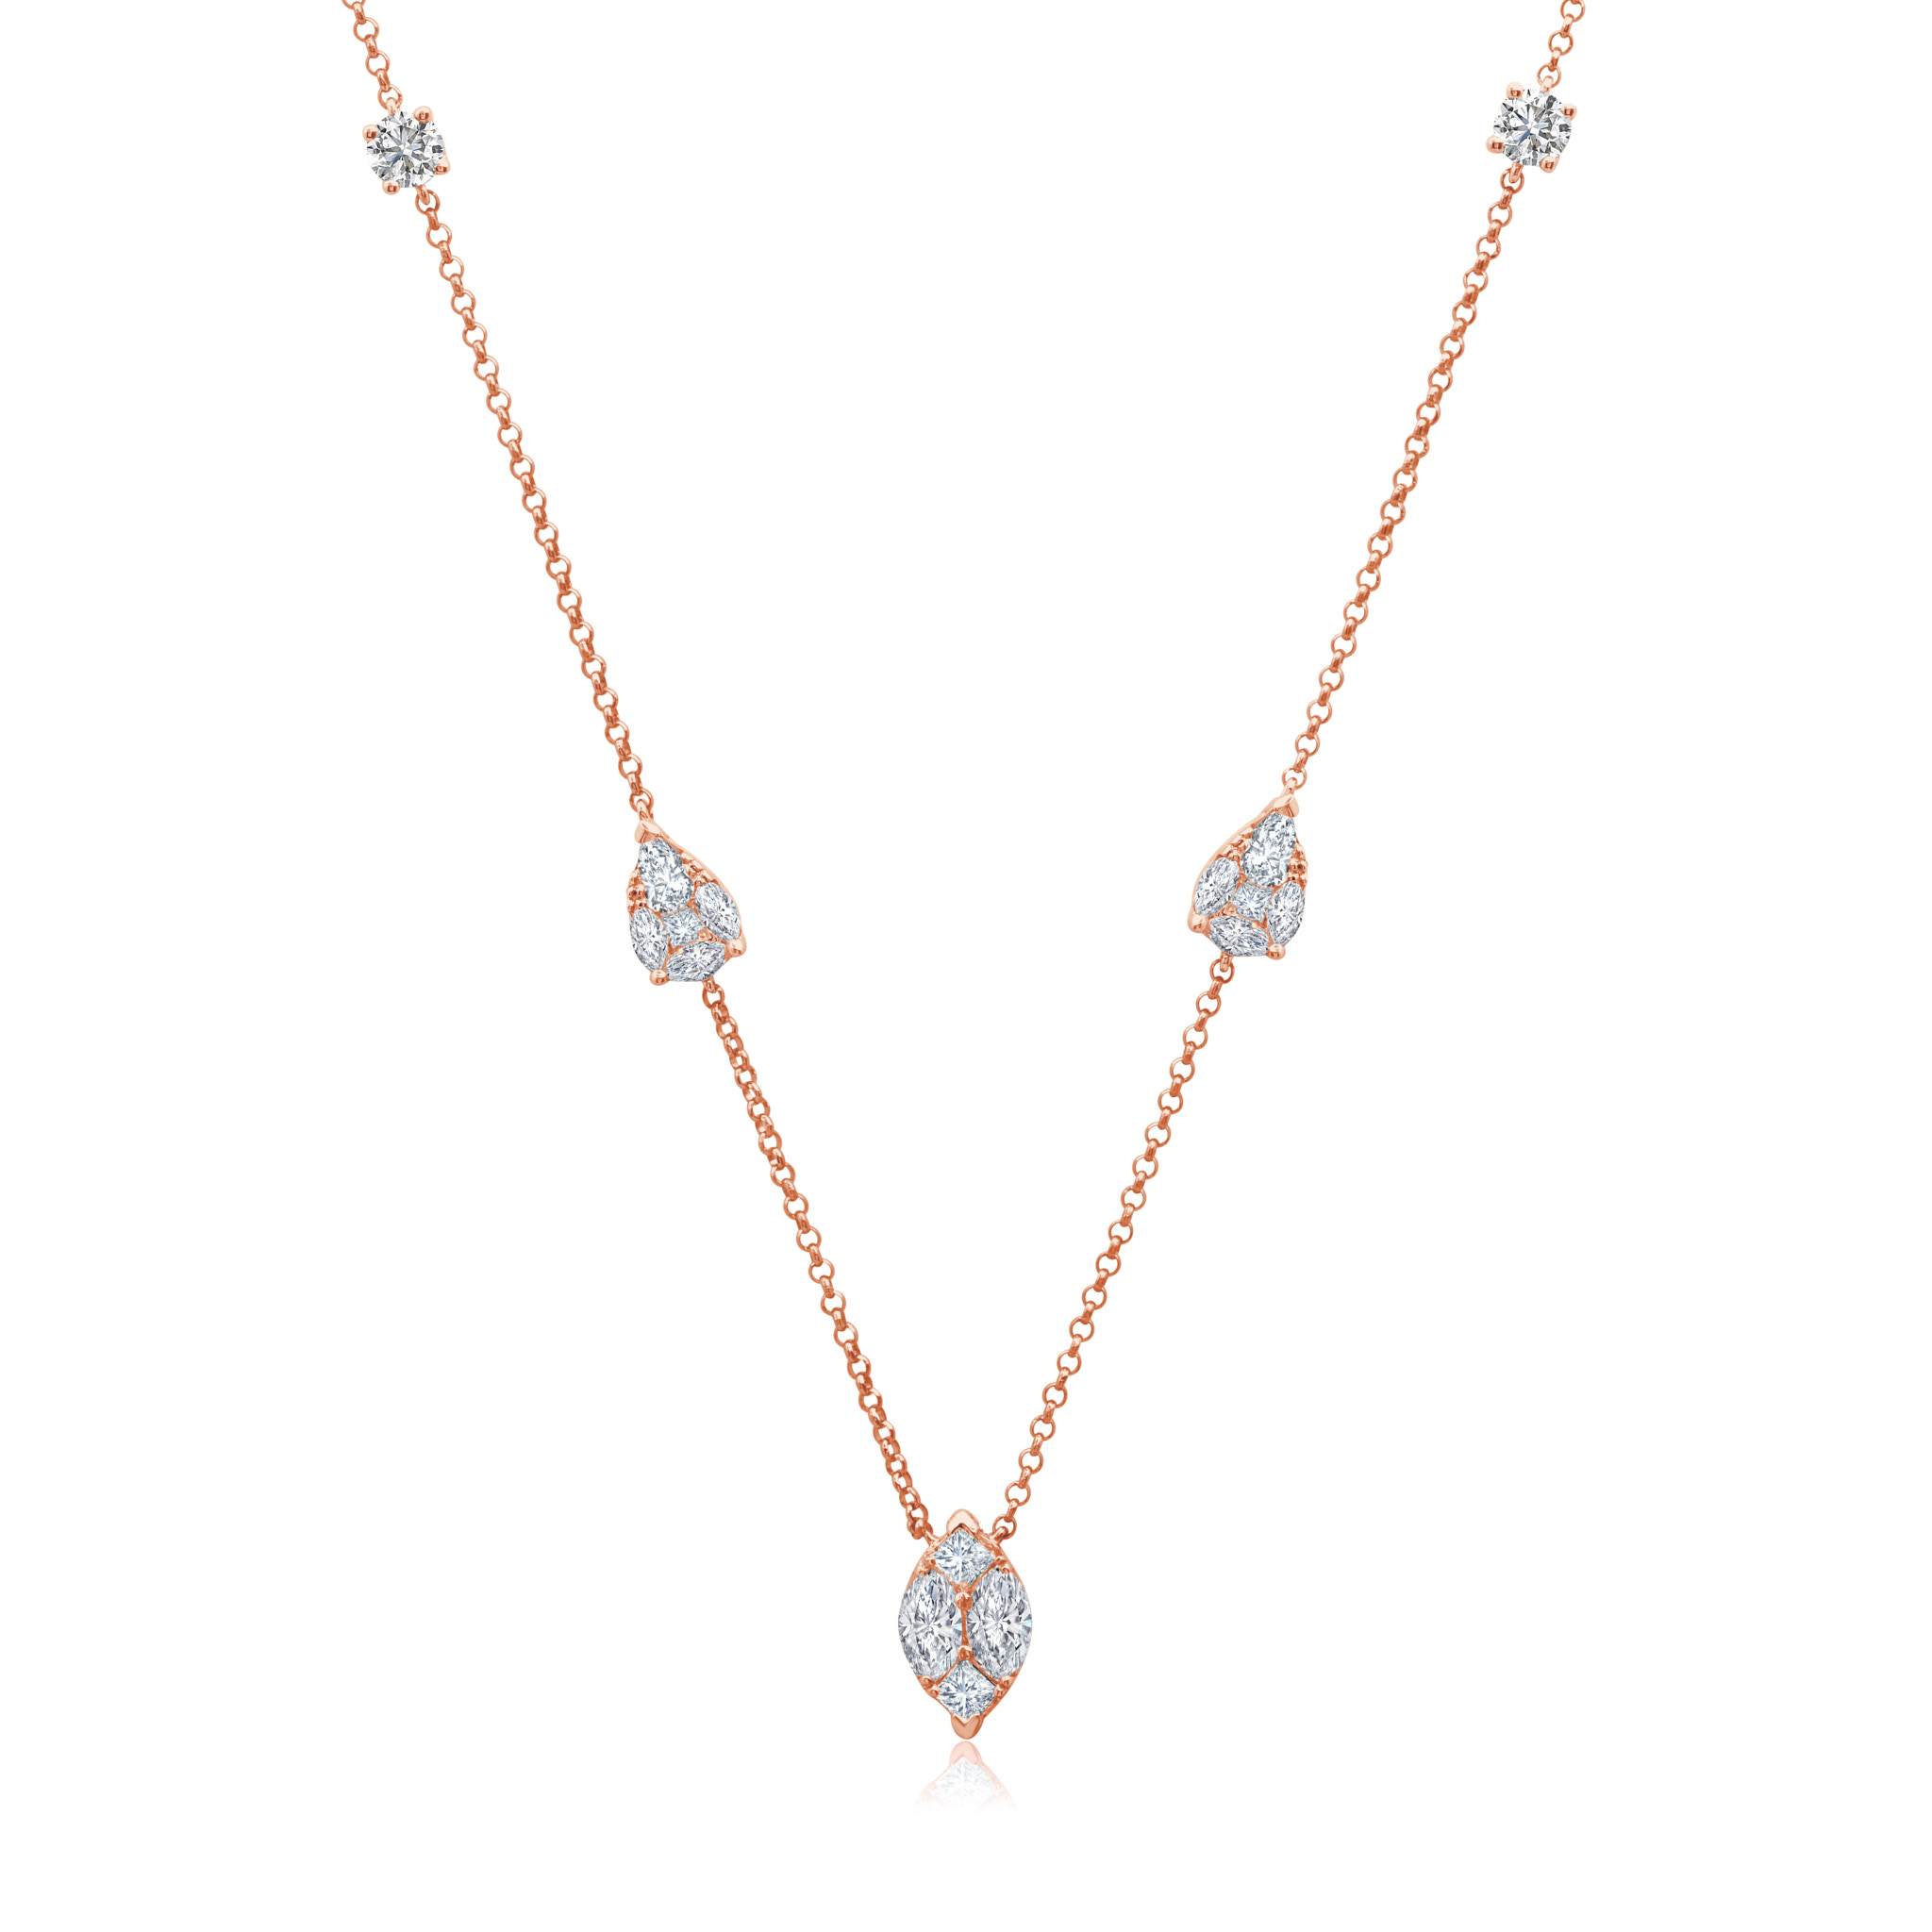 Graziela Gems - Necklace - Pear &amp; Marquise Diamond Ascension Necklace - Rose Gold